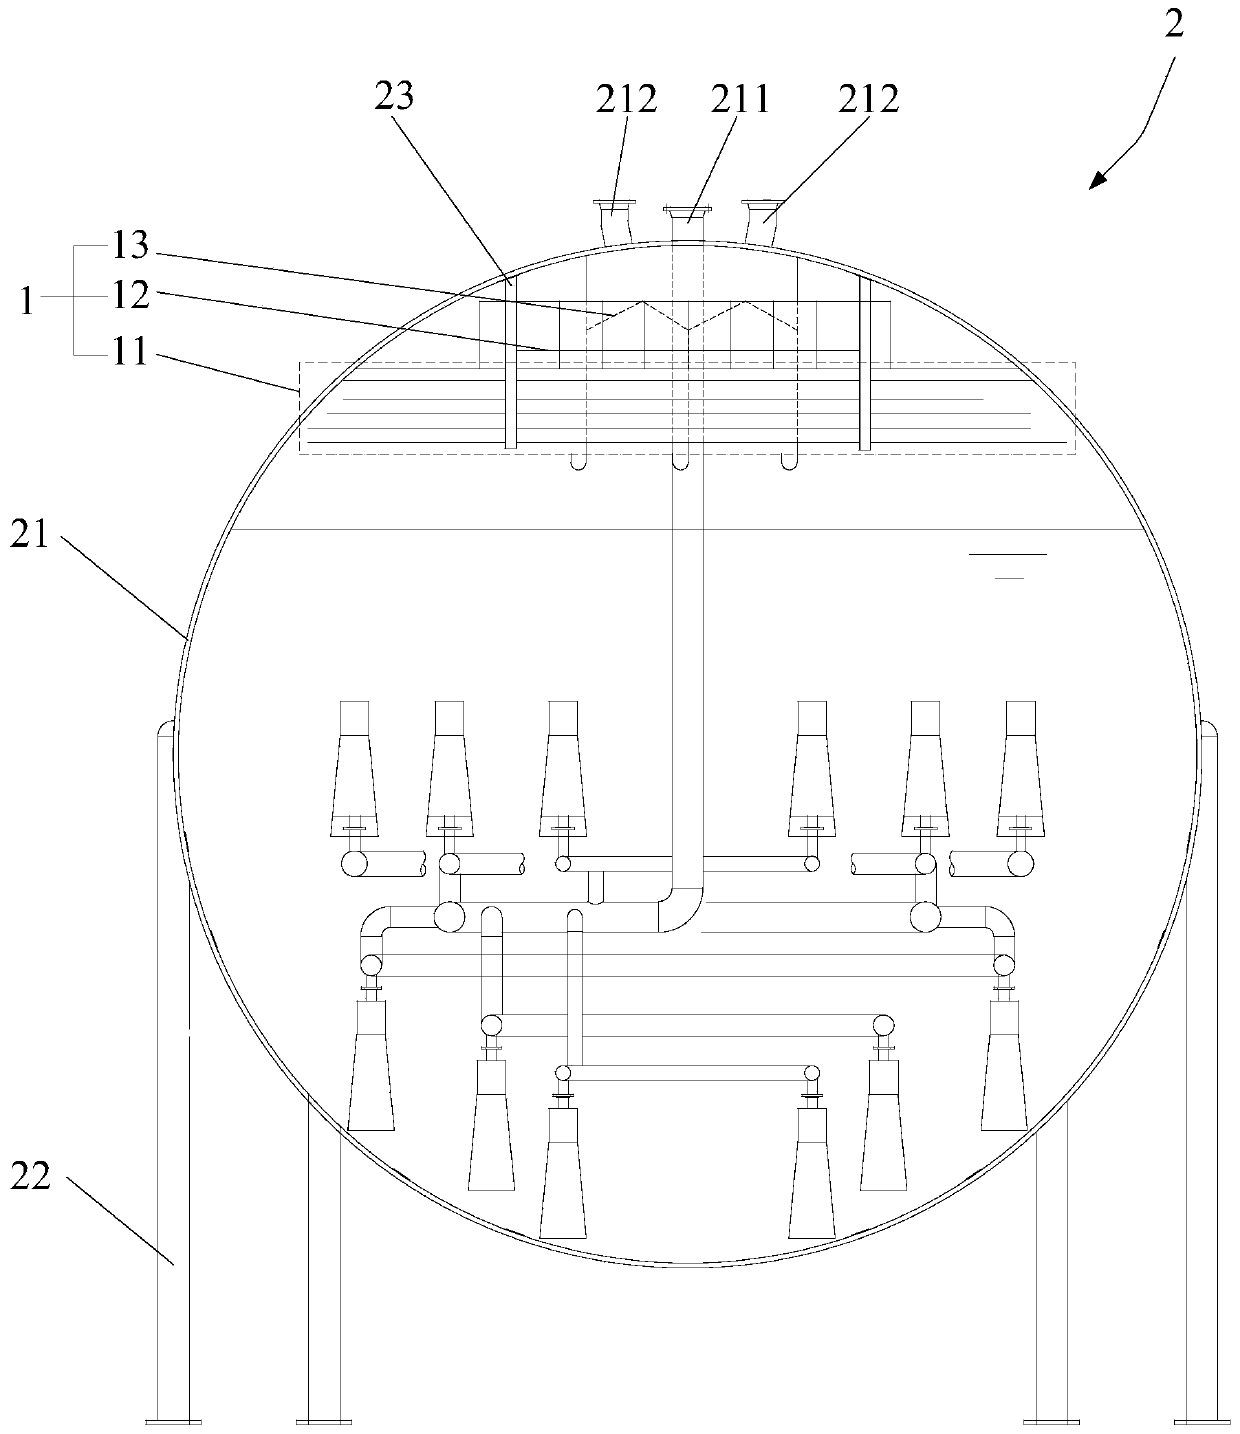 Multi-stage composite steam dehydration structure and heat accumulator